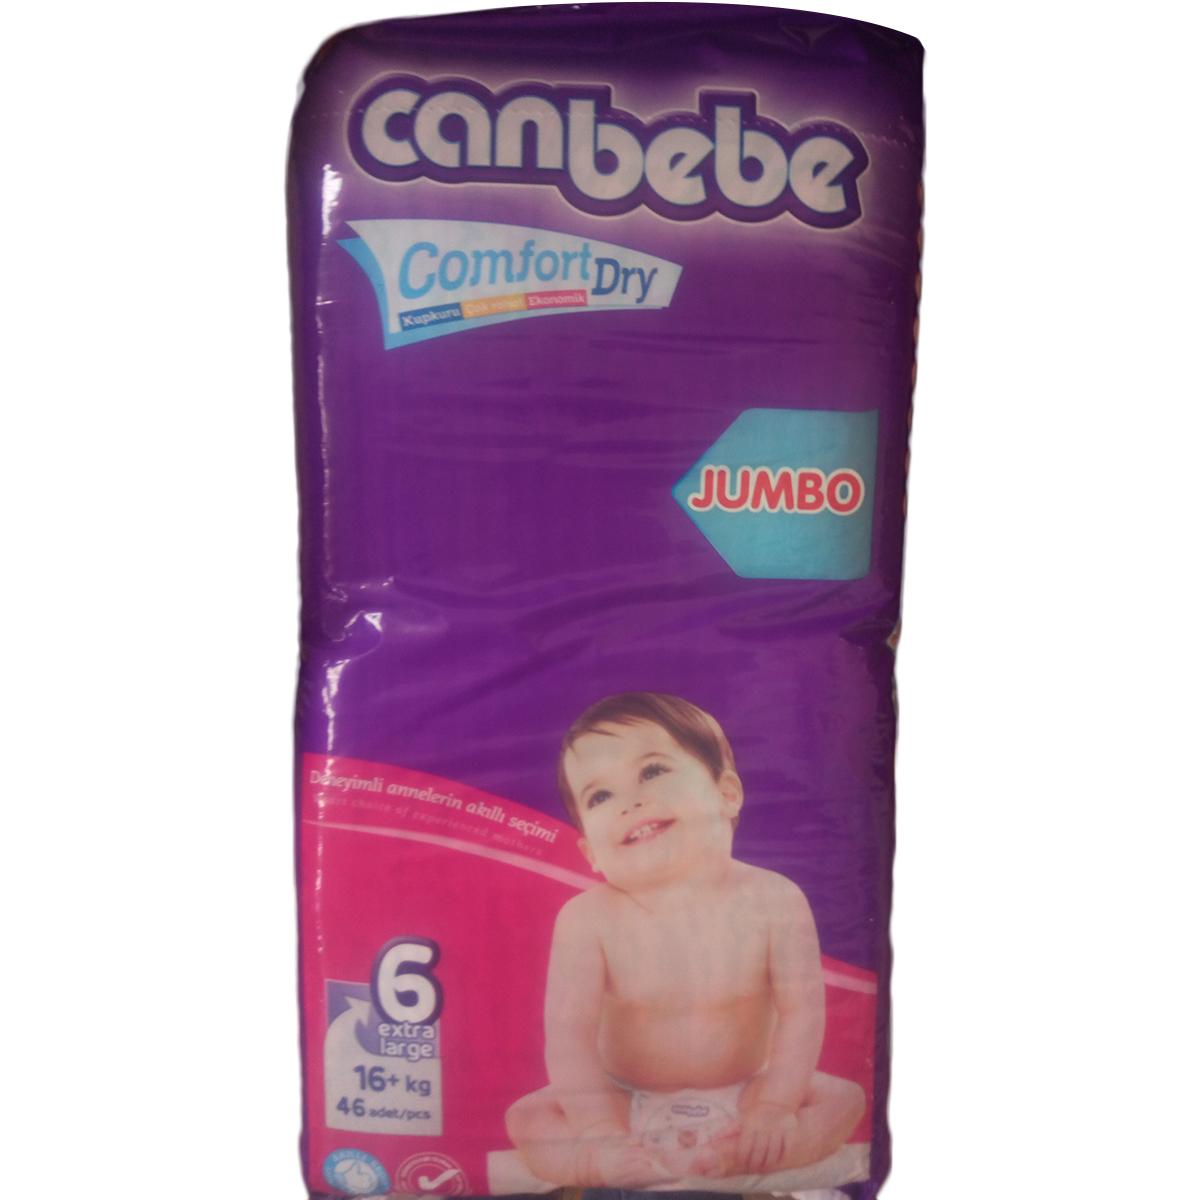 Canbebe Jumbo Size 6 Diapers Extra Large 46 Pcs Buy Online At Best Prices In Pakistan Daraz Pk